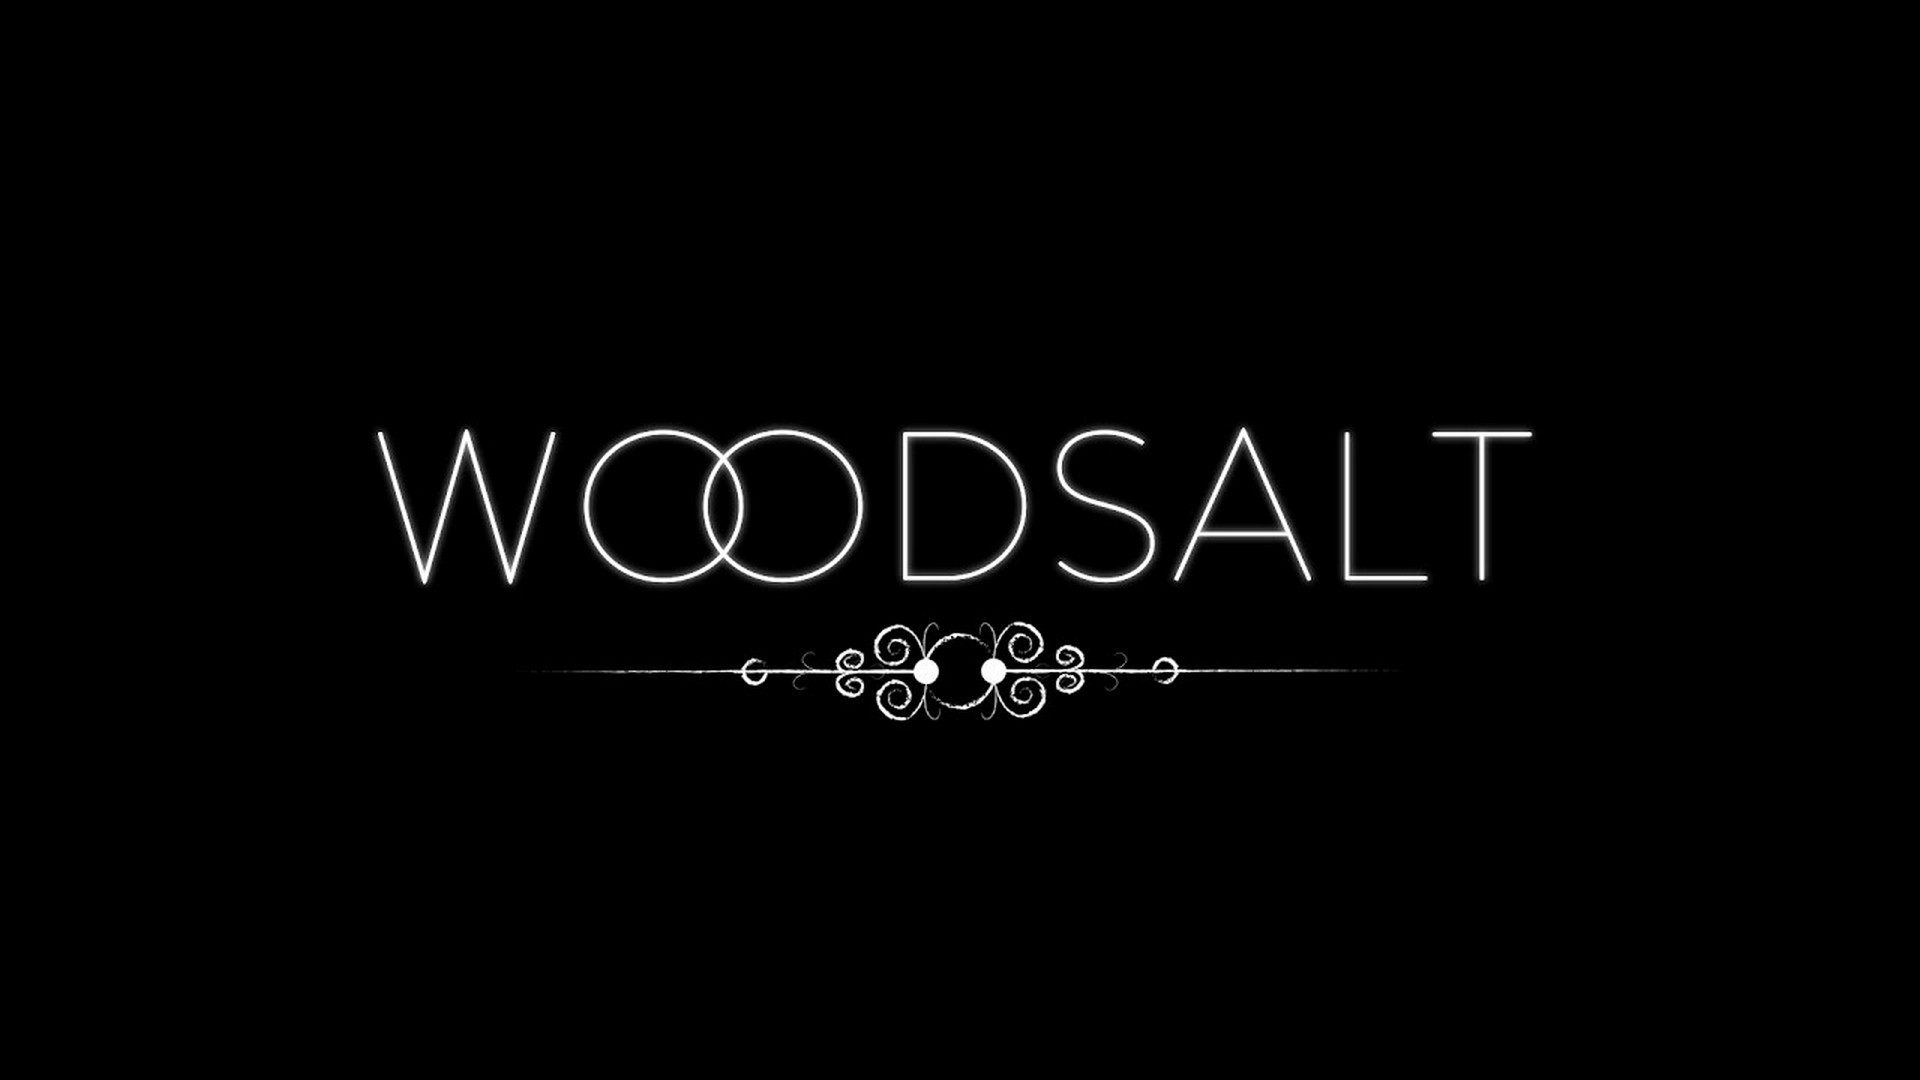 Inspired by the golden age of console RPG games ‘Woodsalt’ comes to Nintendo Switch